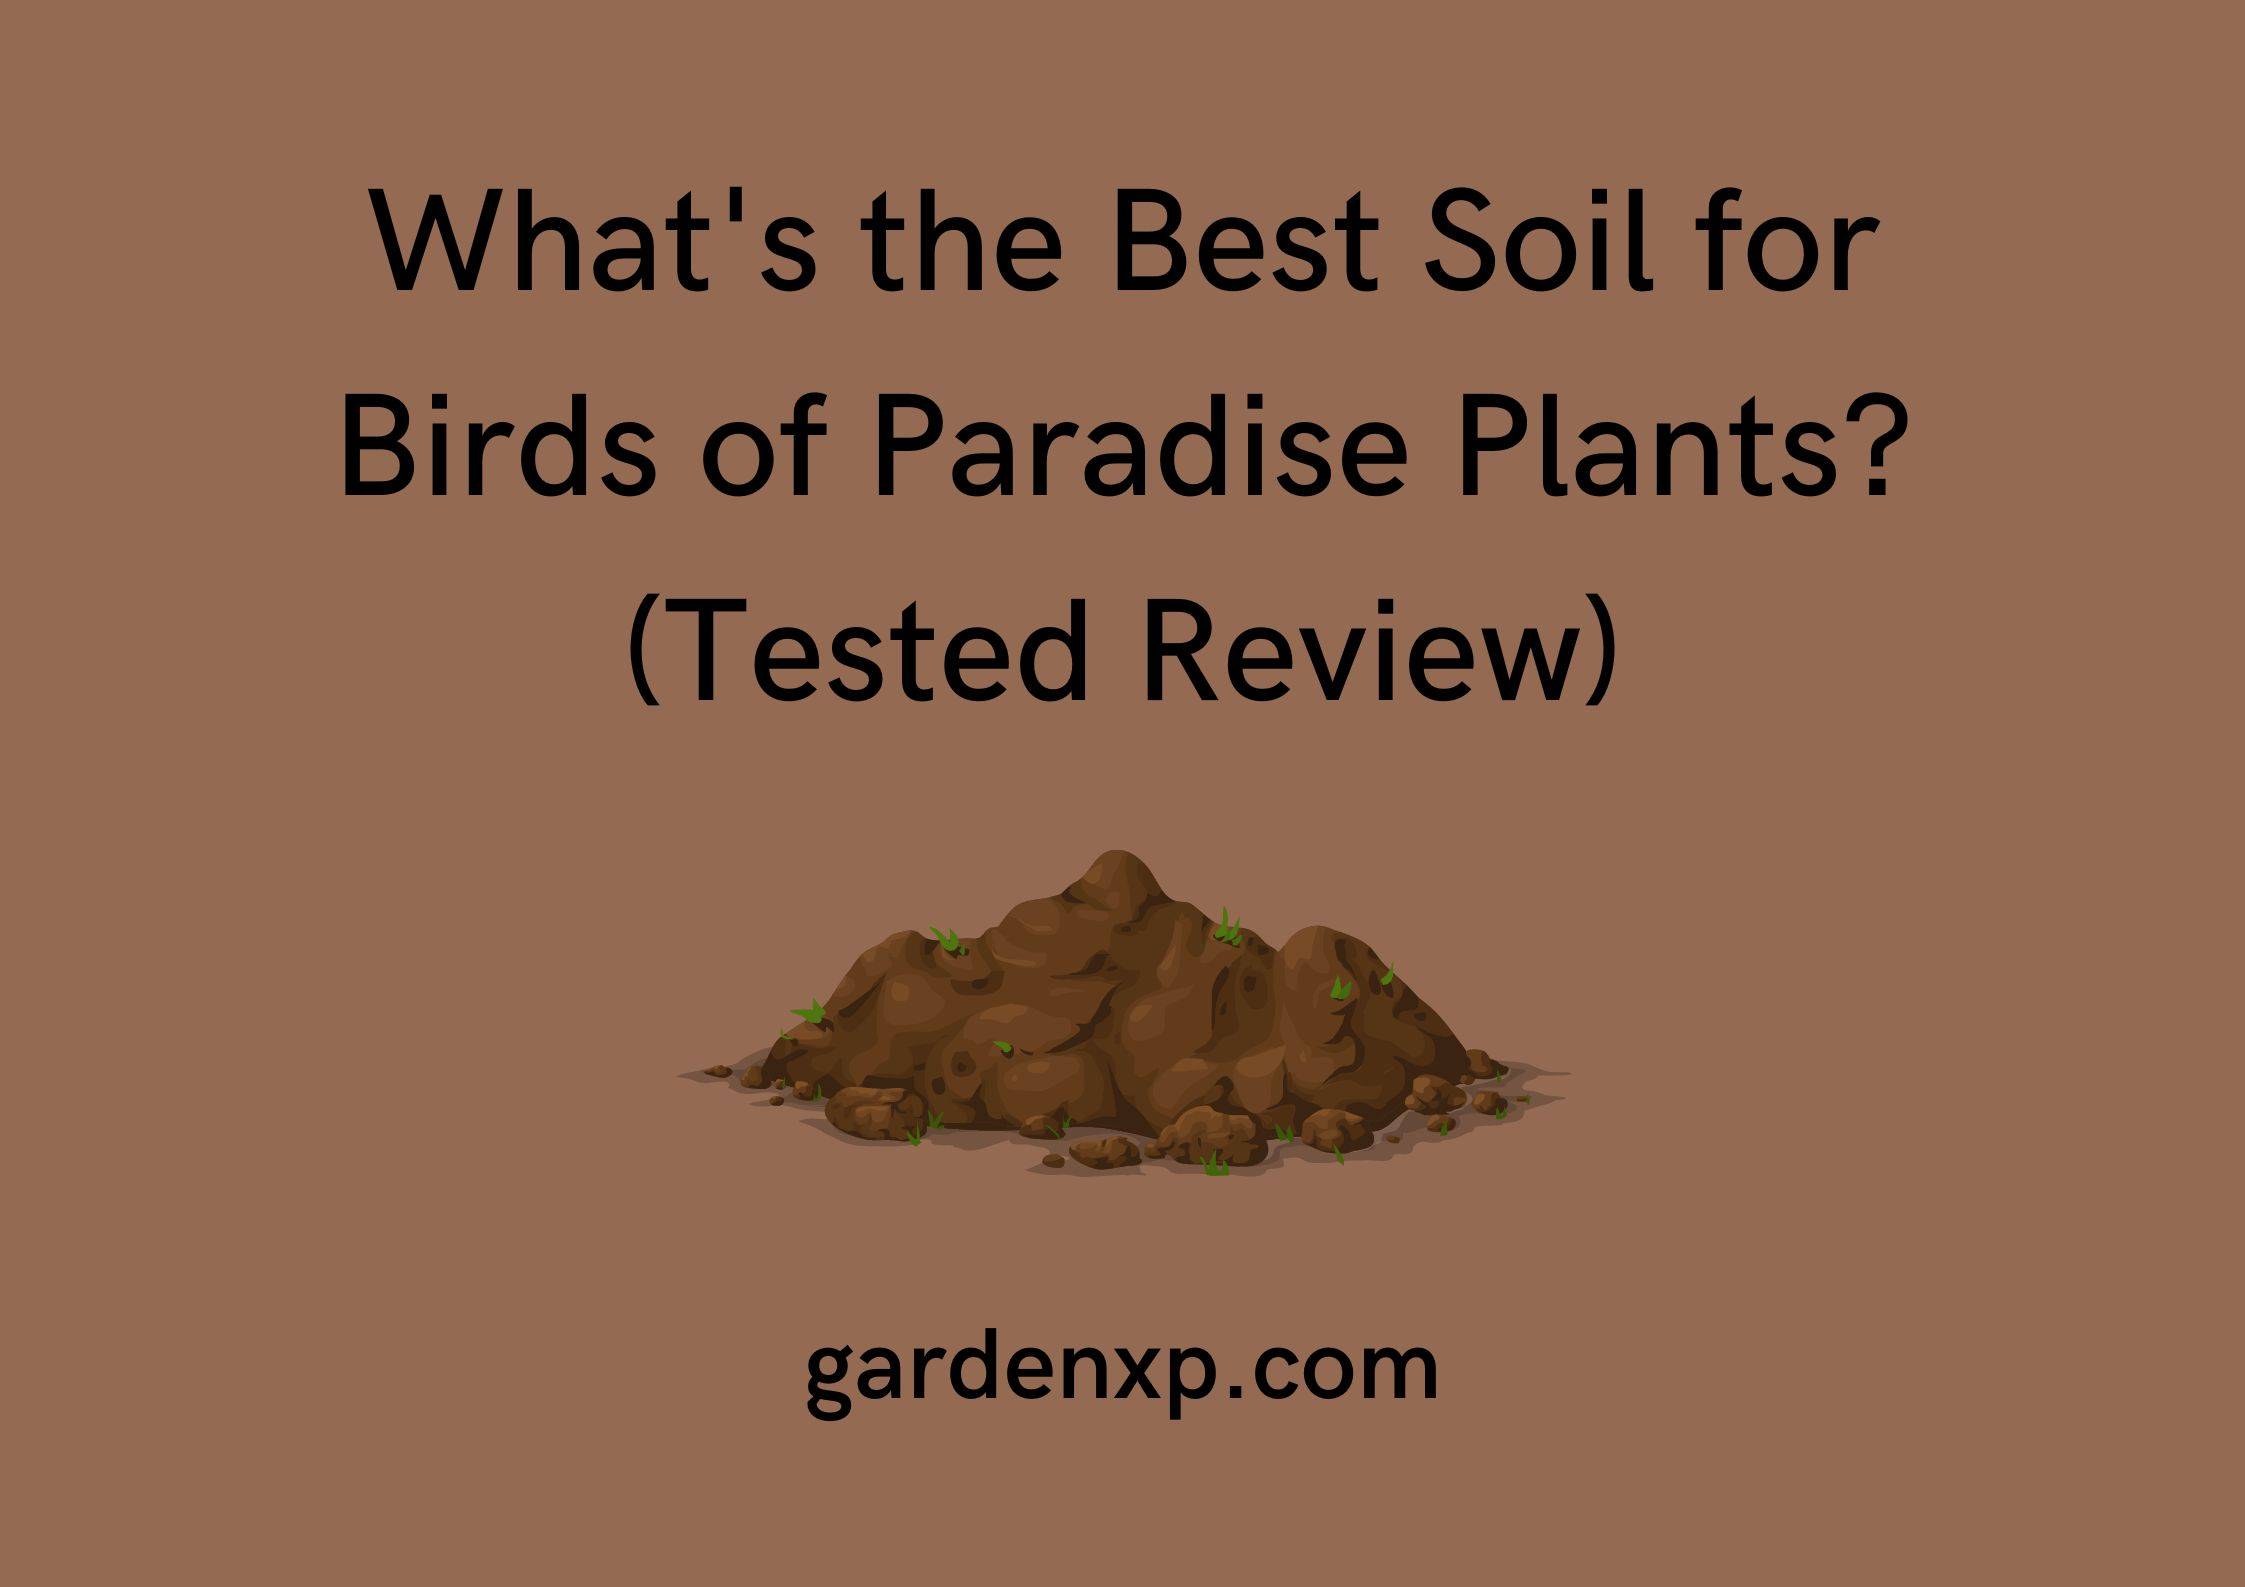 What's the Best Soil for Birds of Paradise Plants? (Tested Review)